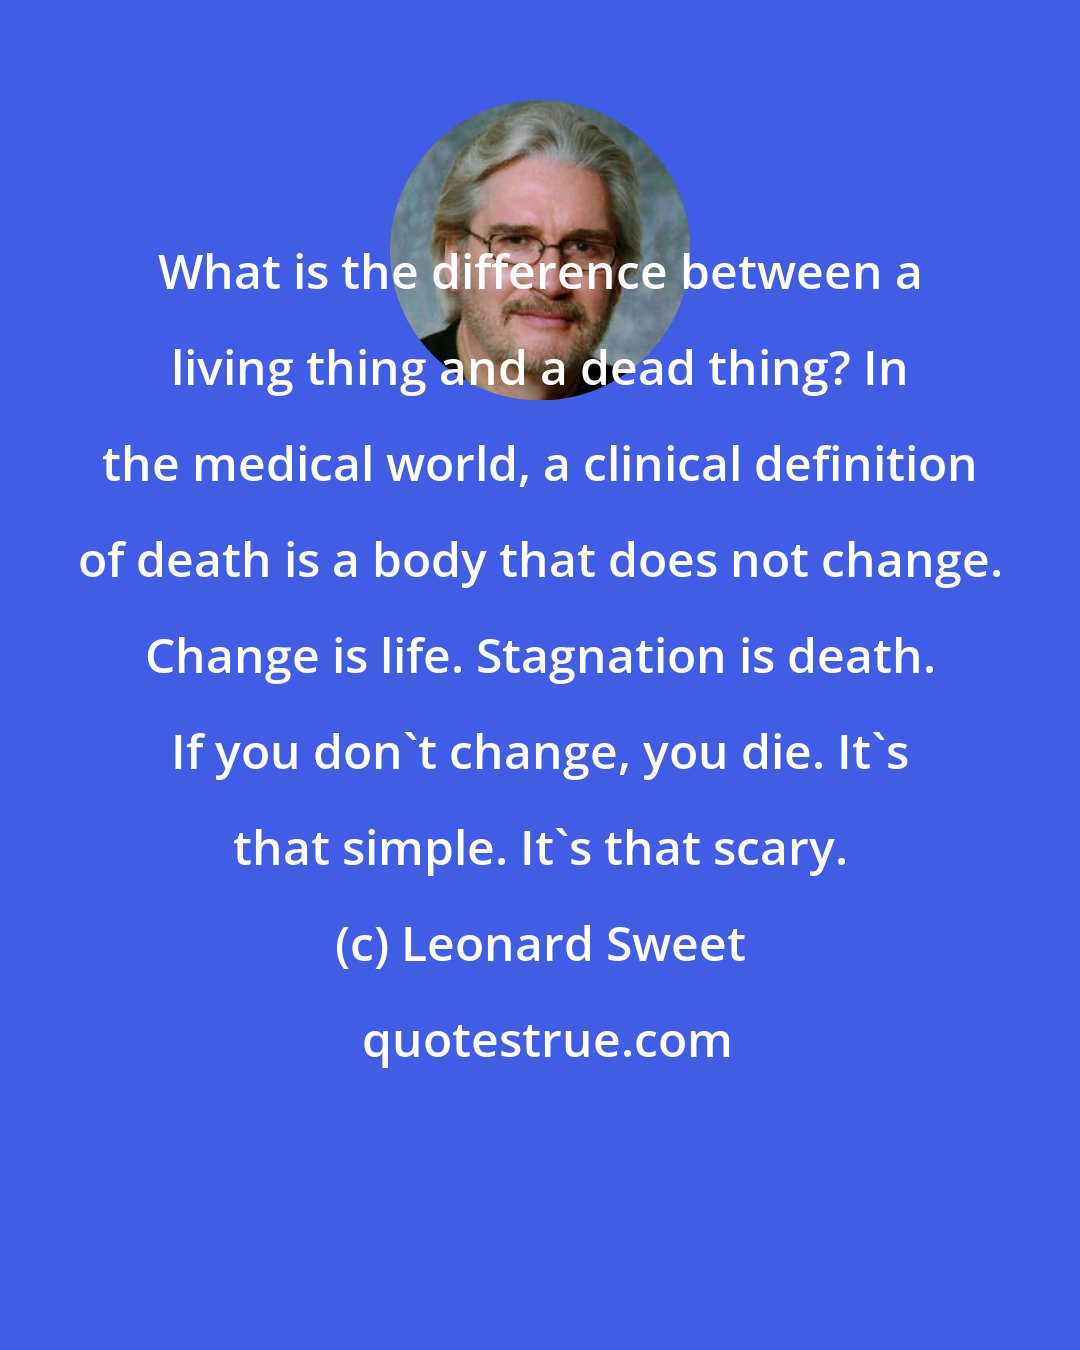 Leonard Sweet: What is the difference between a living thing and a dead thing? In the medical world, a clinical definition of death is a body that does not change. Change is life. Stagnation is death. If you don't change, you die. It's that simple. It's that scary.